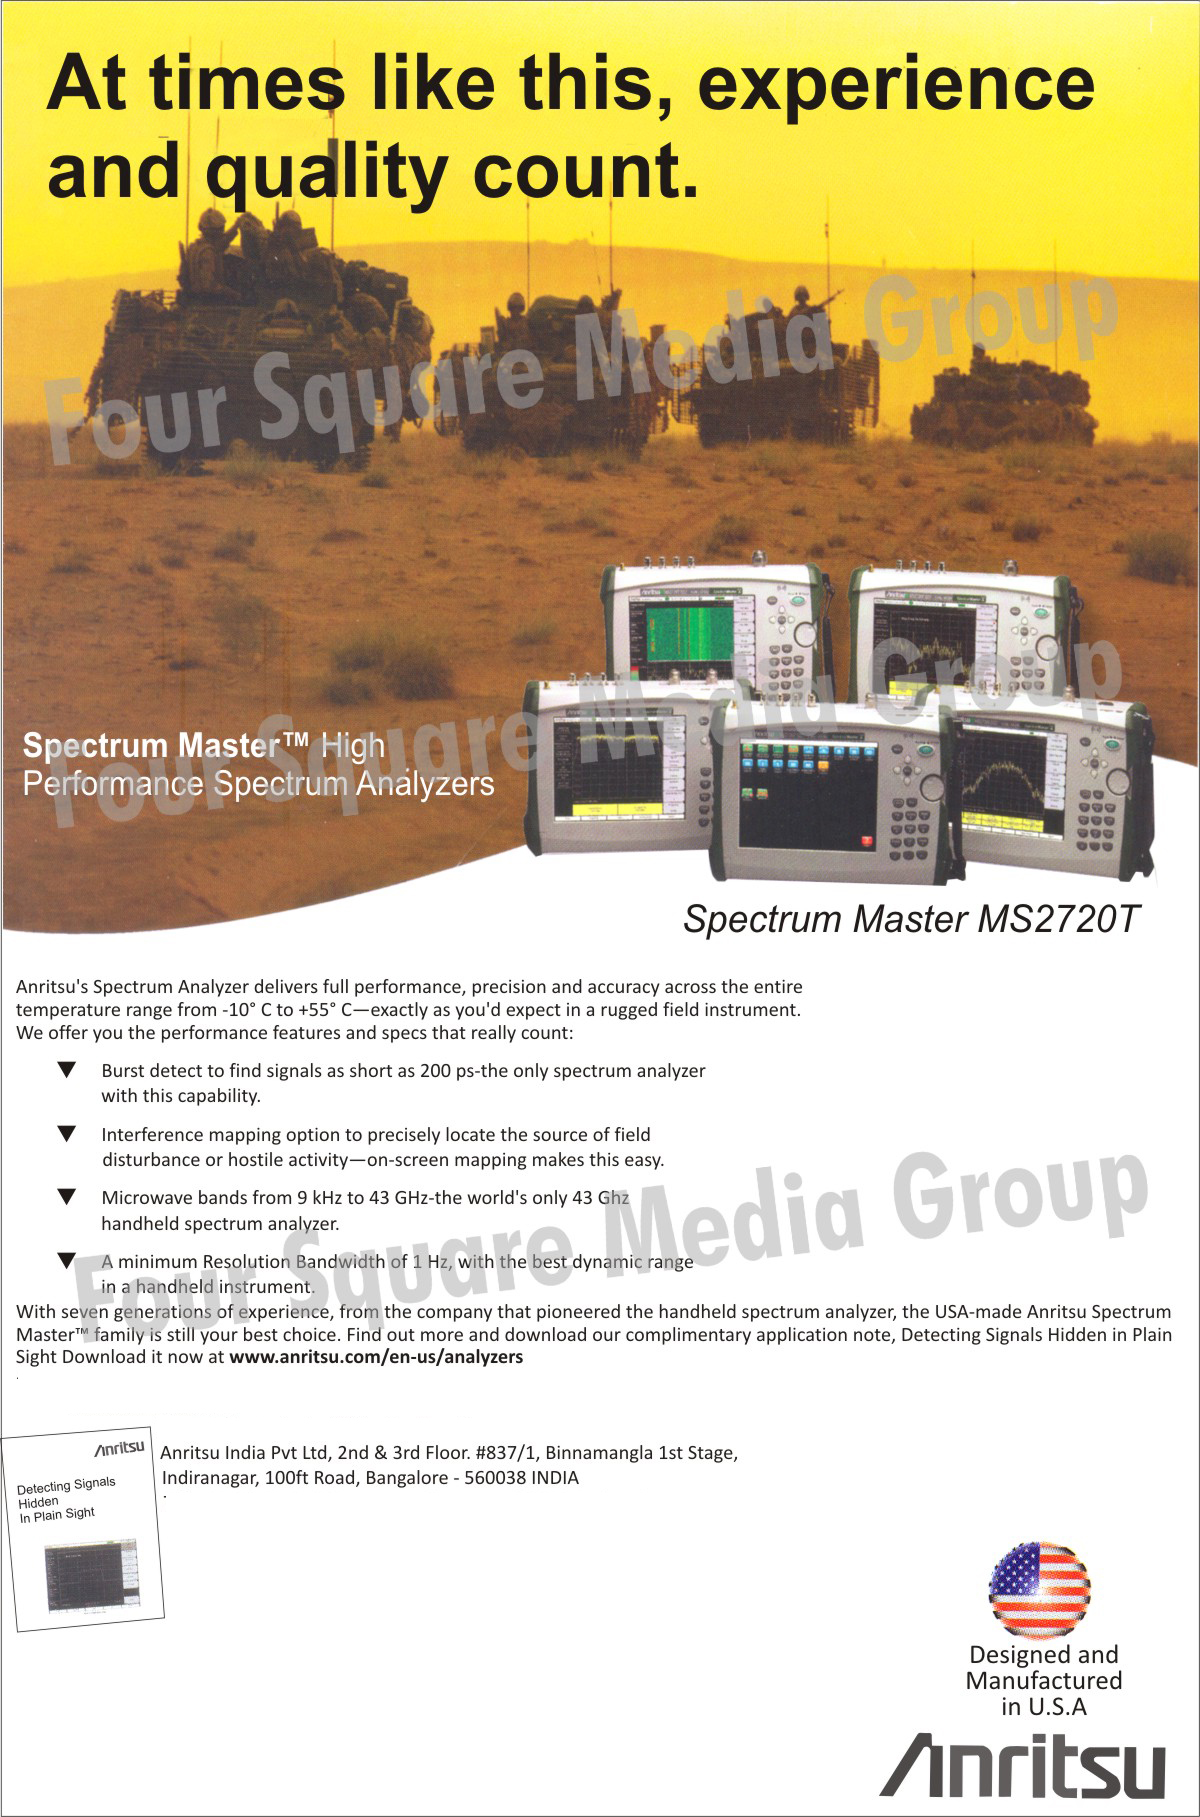 Mobile Wireless Communications, Station Analyzers, Bluetooth Instruments, Cable Analyzers, Antenna Analyzers, Interference Hunter, Power Meters, Power Sensors, Signal Generators, Optical Devices, Power Meters, Vector Network Analyzers, Digital Broadcast Analyzer, Transport Datacom